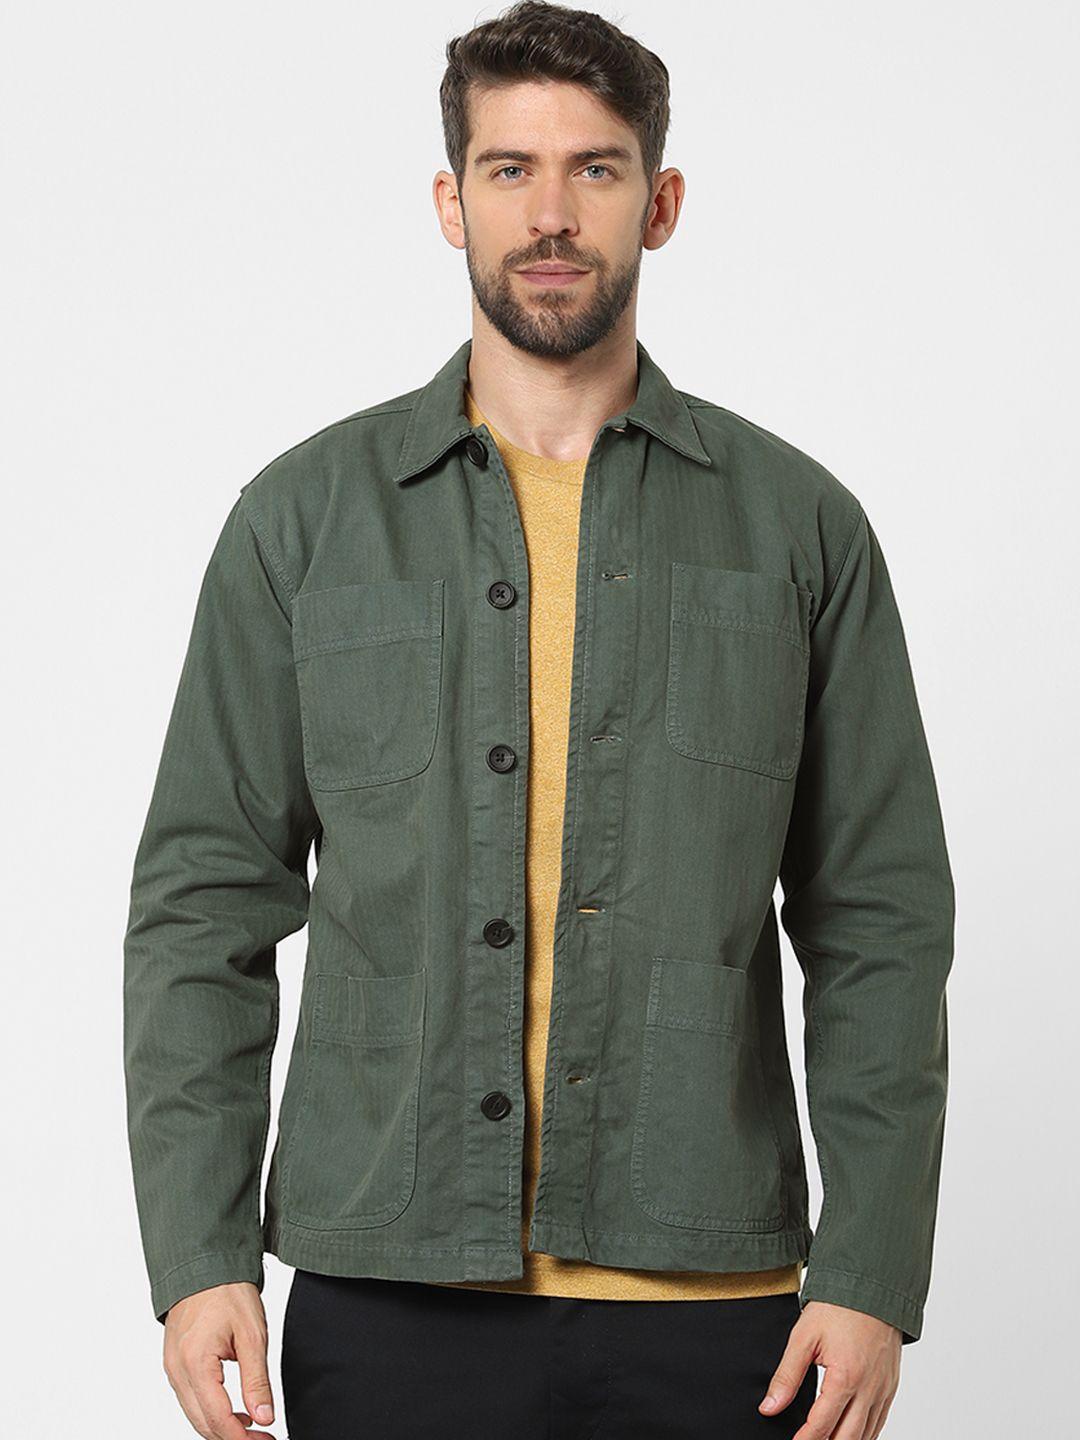 selected men olive green opaque casual shirt